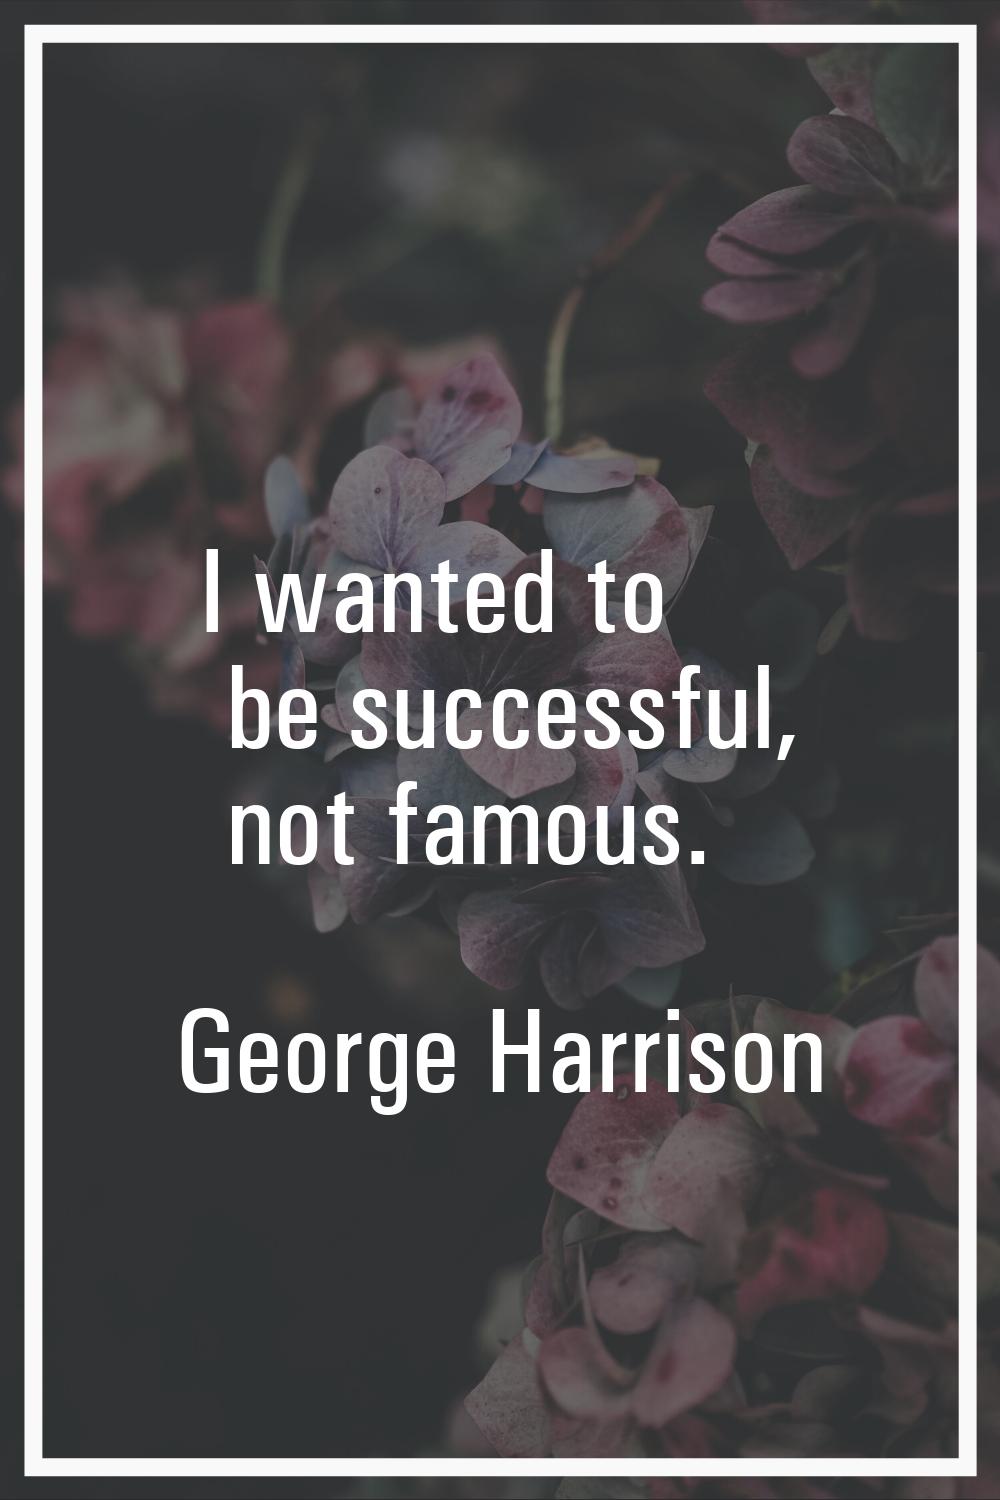 I wanted to be successful, not famous.